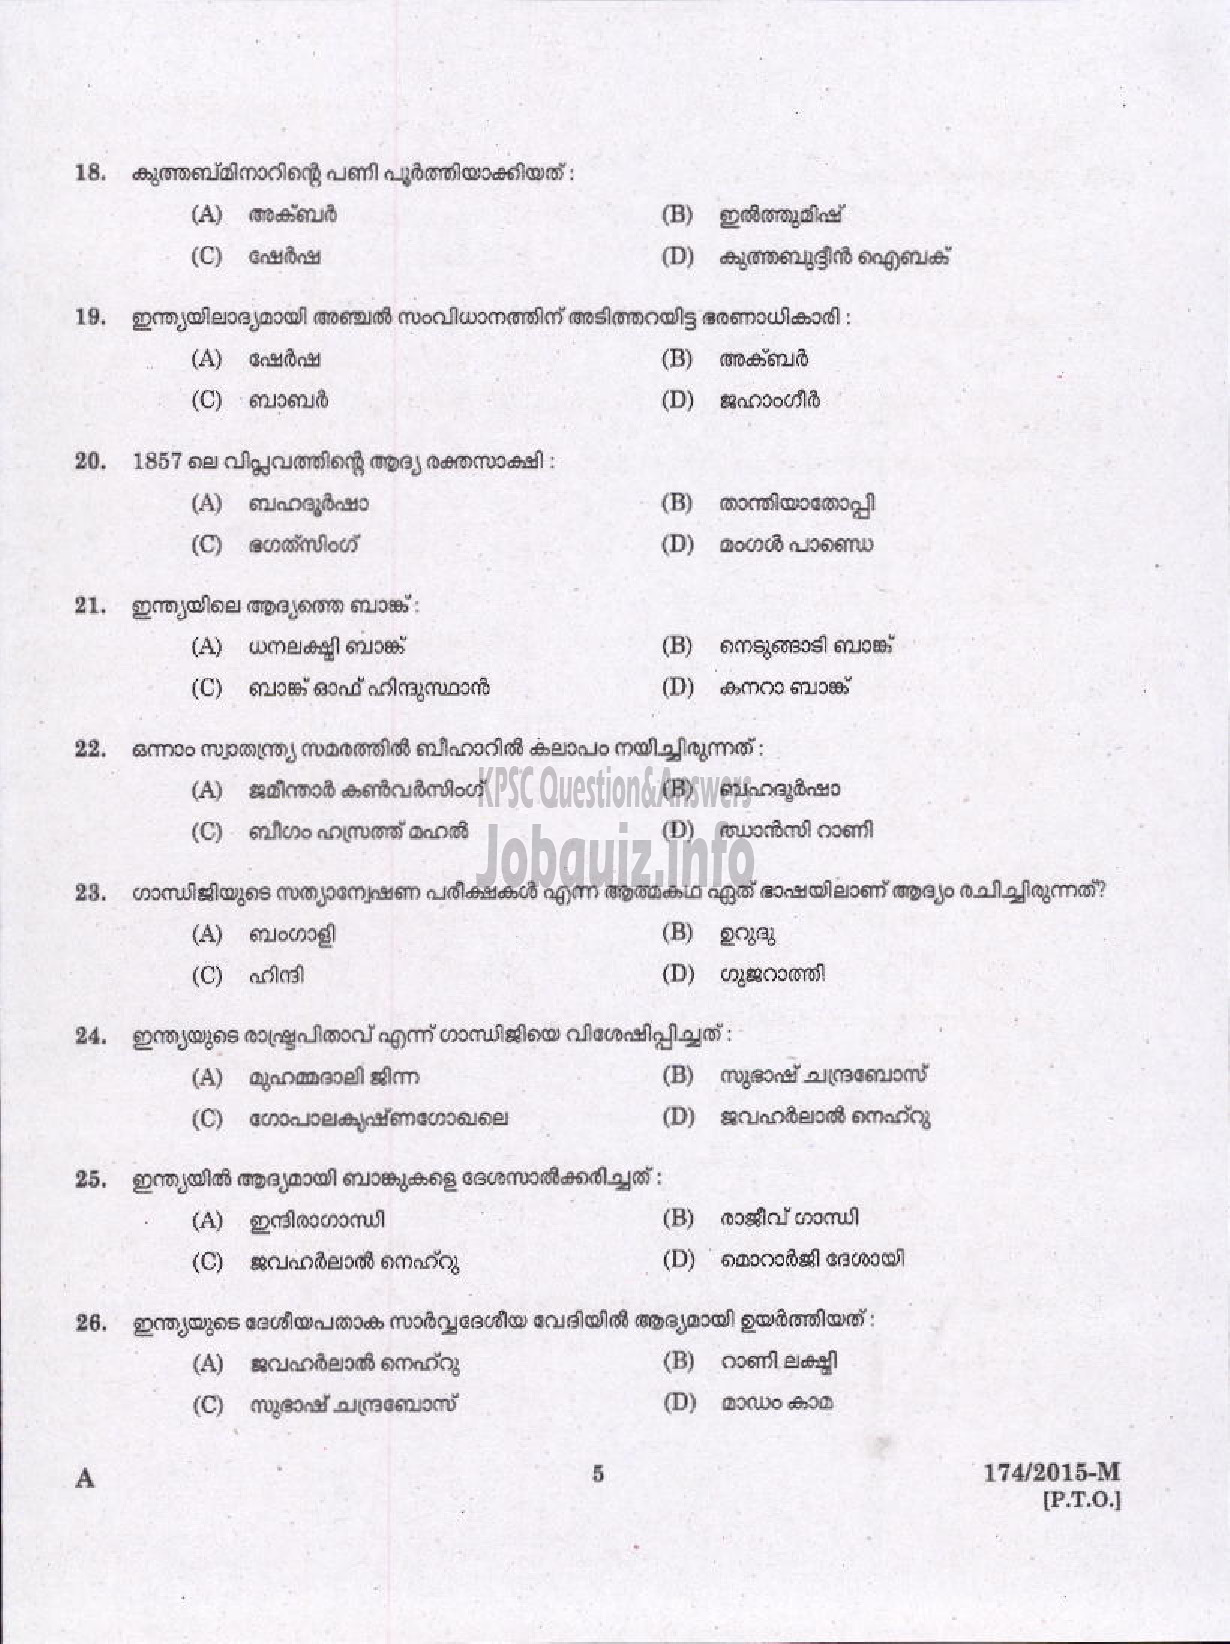 Kerala PSC Question Paper - DRIVER GRADE GR II HDV VARIOUS/EXCISE ( Malayalam ) -3